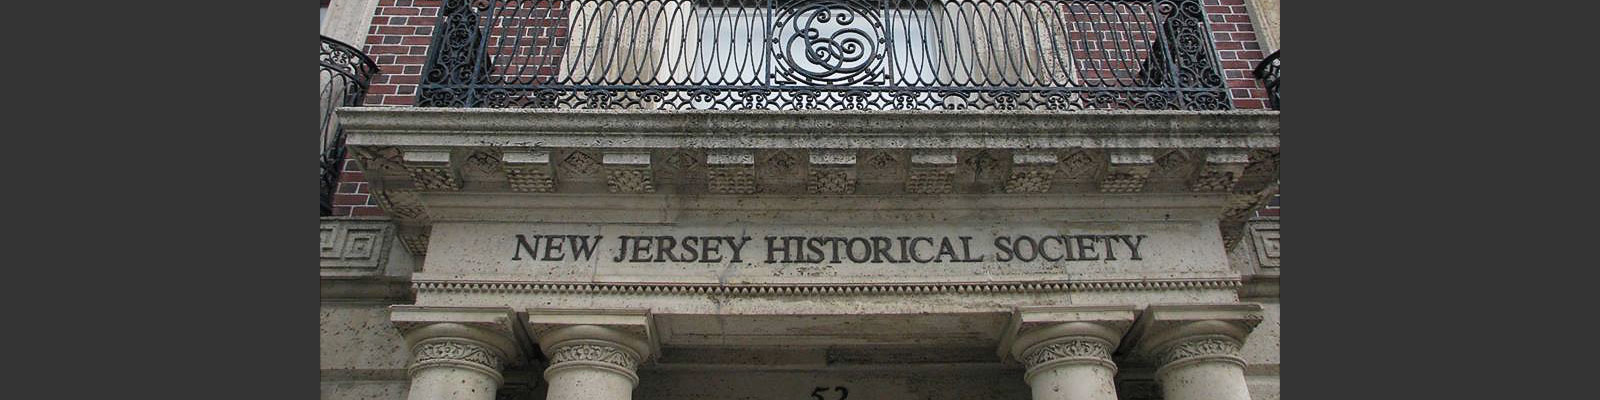 The New Jersey Historical Society